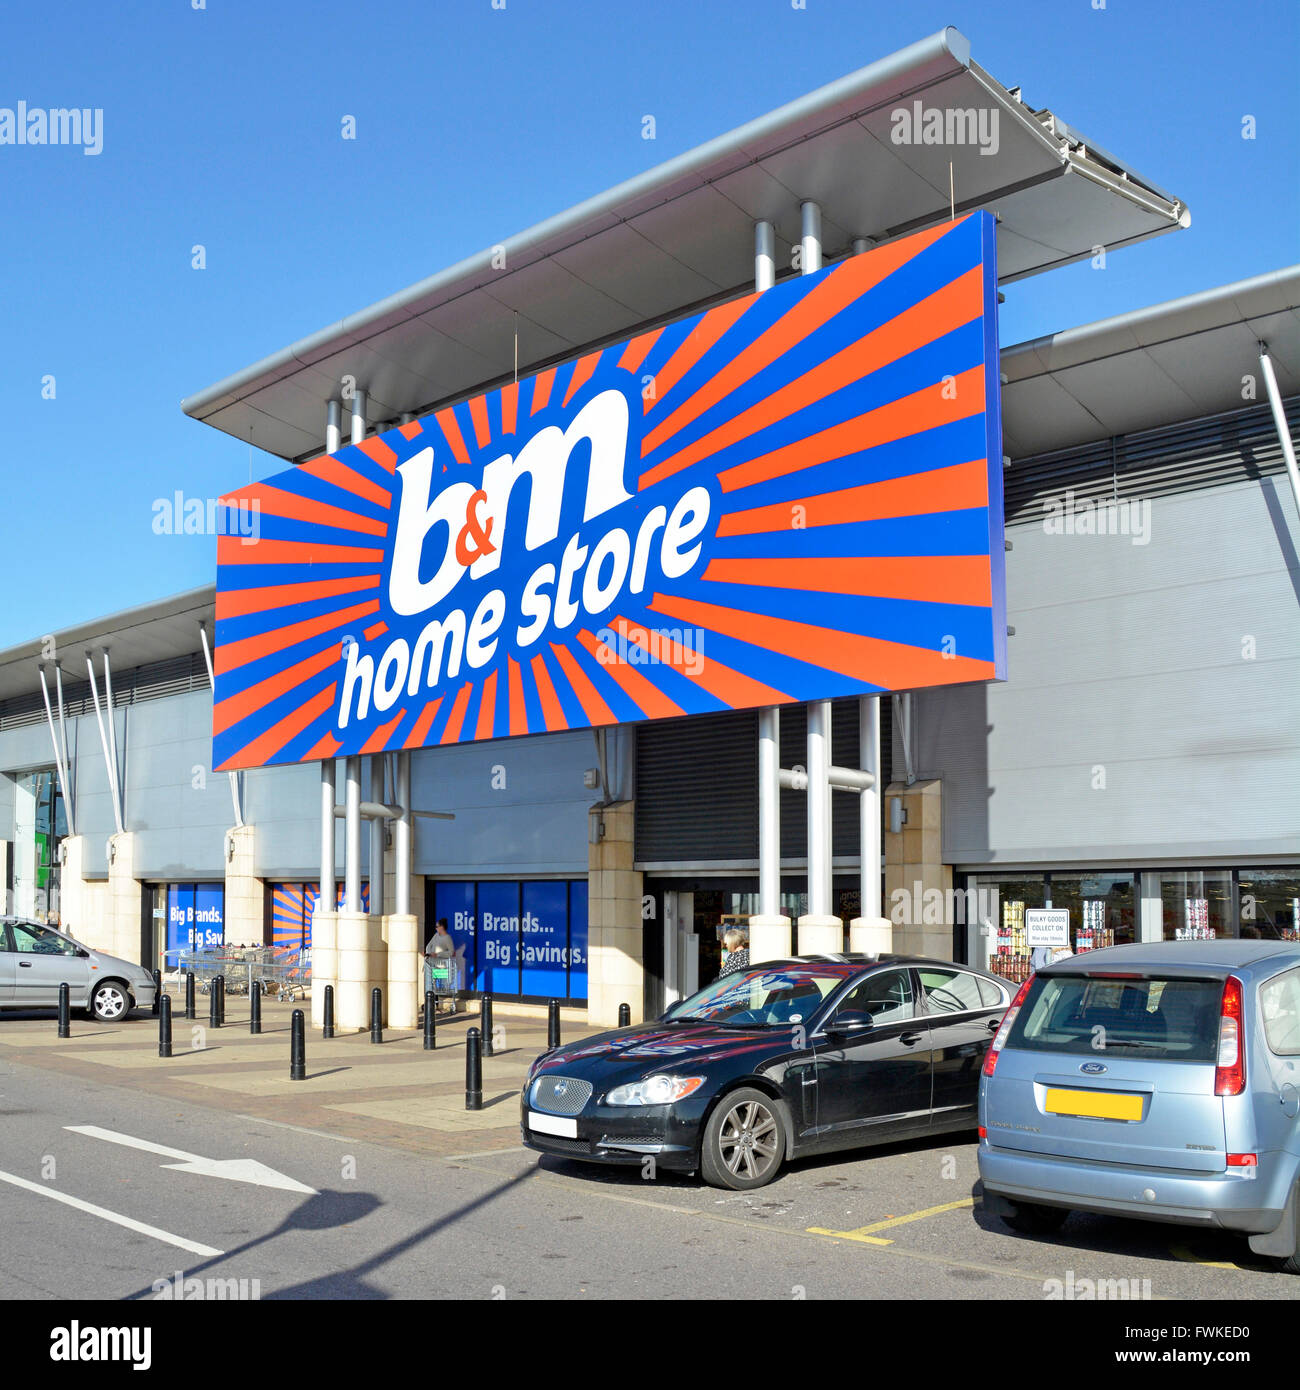 B&M Retail Ltd a business for home bargains store logo brand sign & entrance at Lakeside retail park with free car parking Thurrock Essex England UK Stock Photo